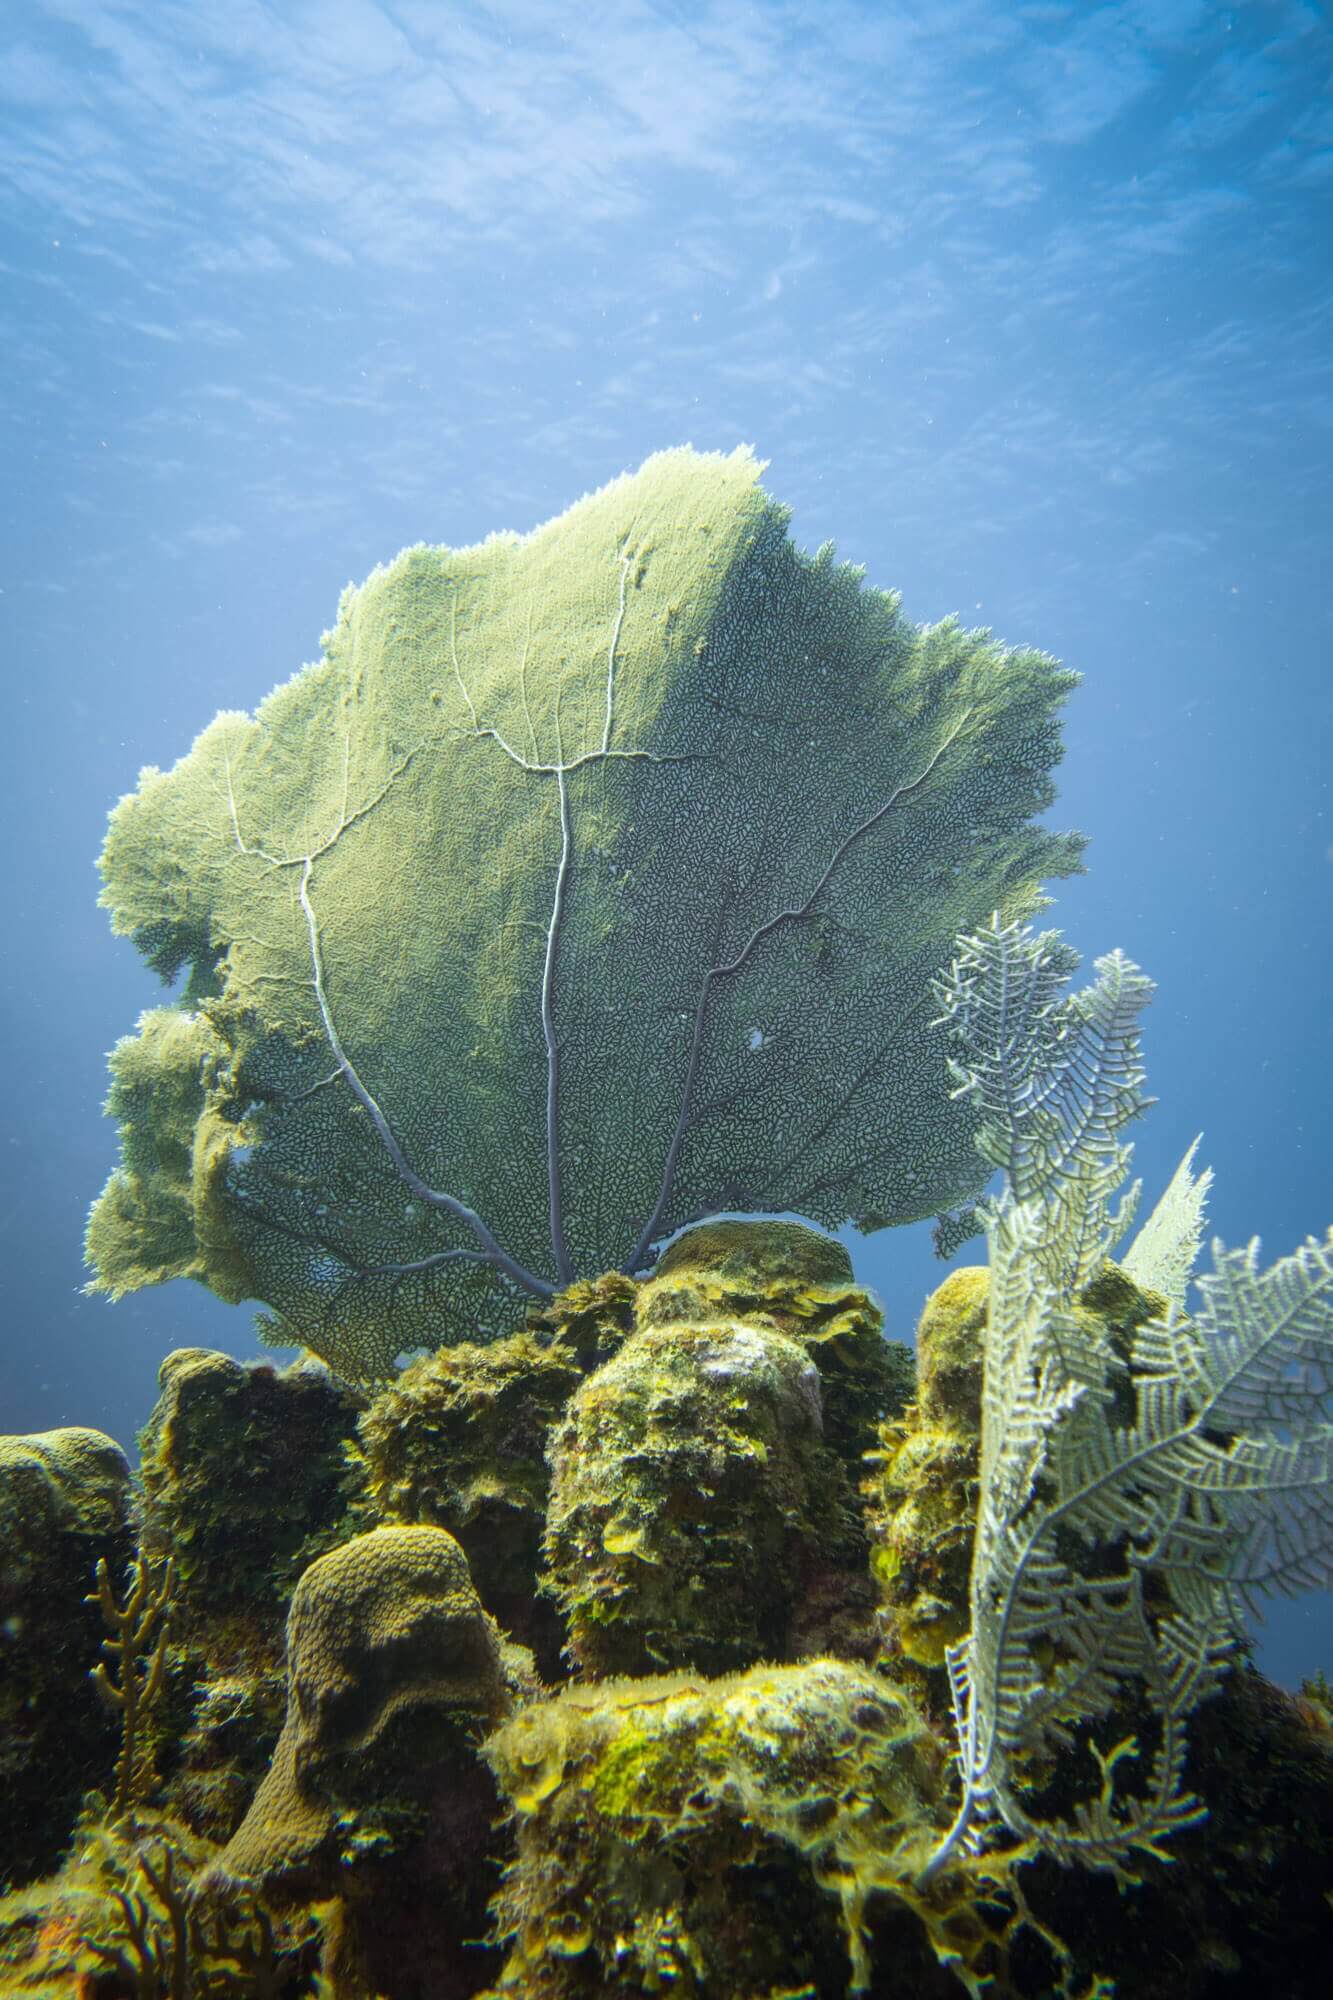 Fan coral is everywhere in Roatán, and is always beautiful